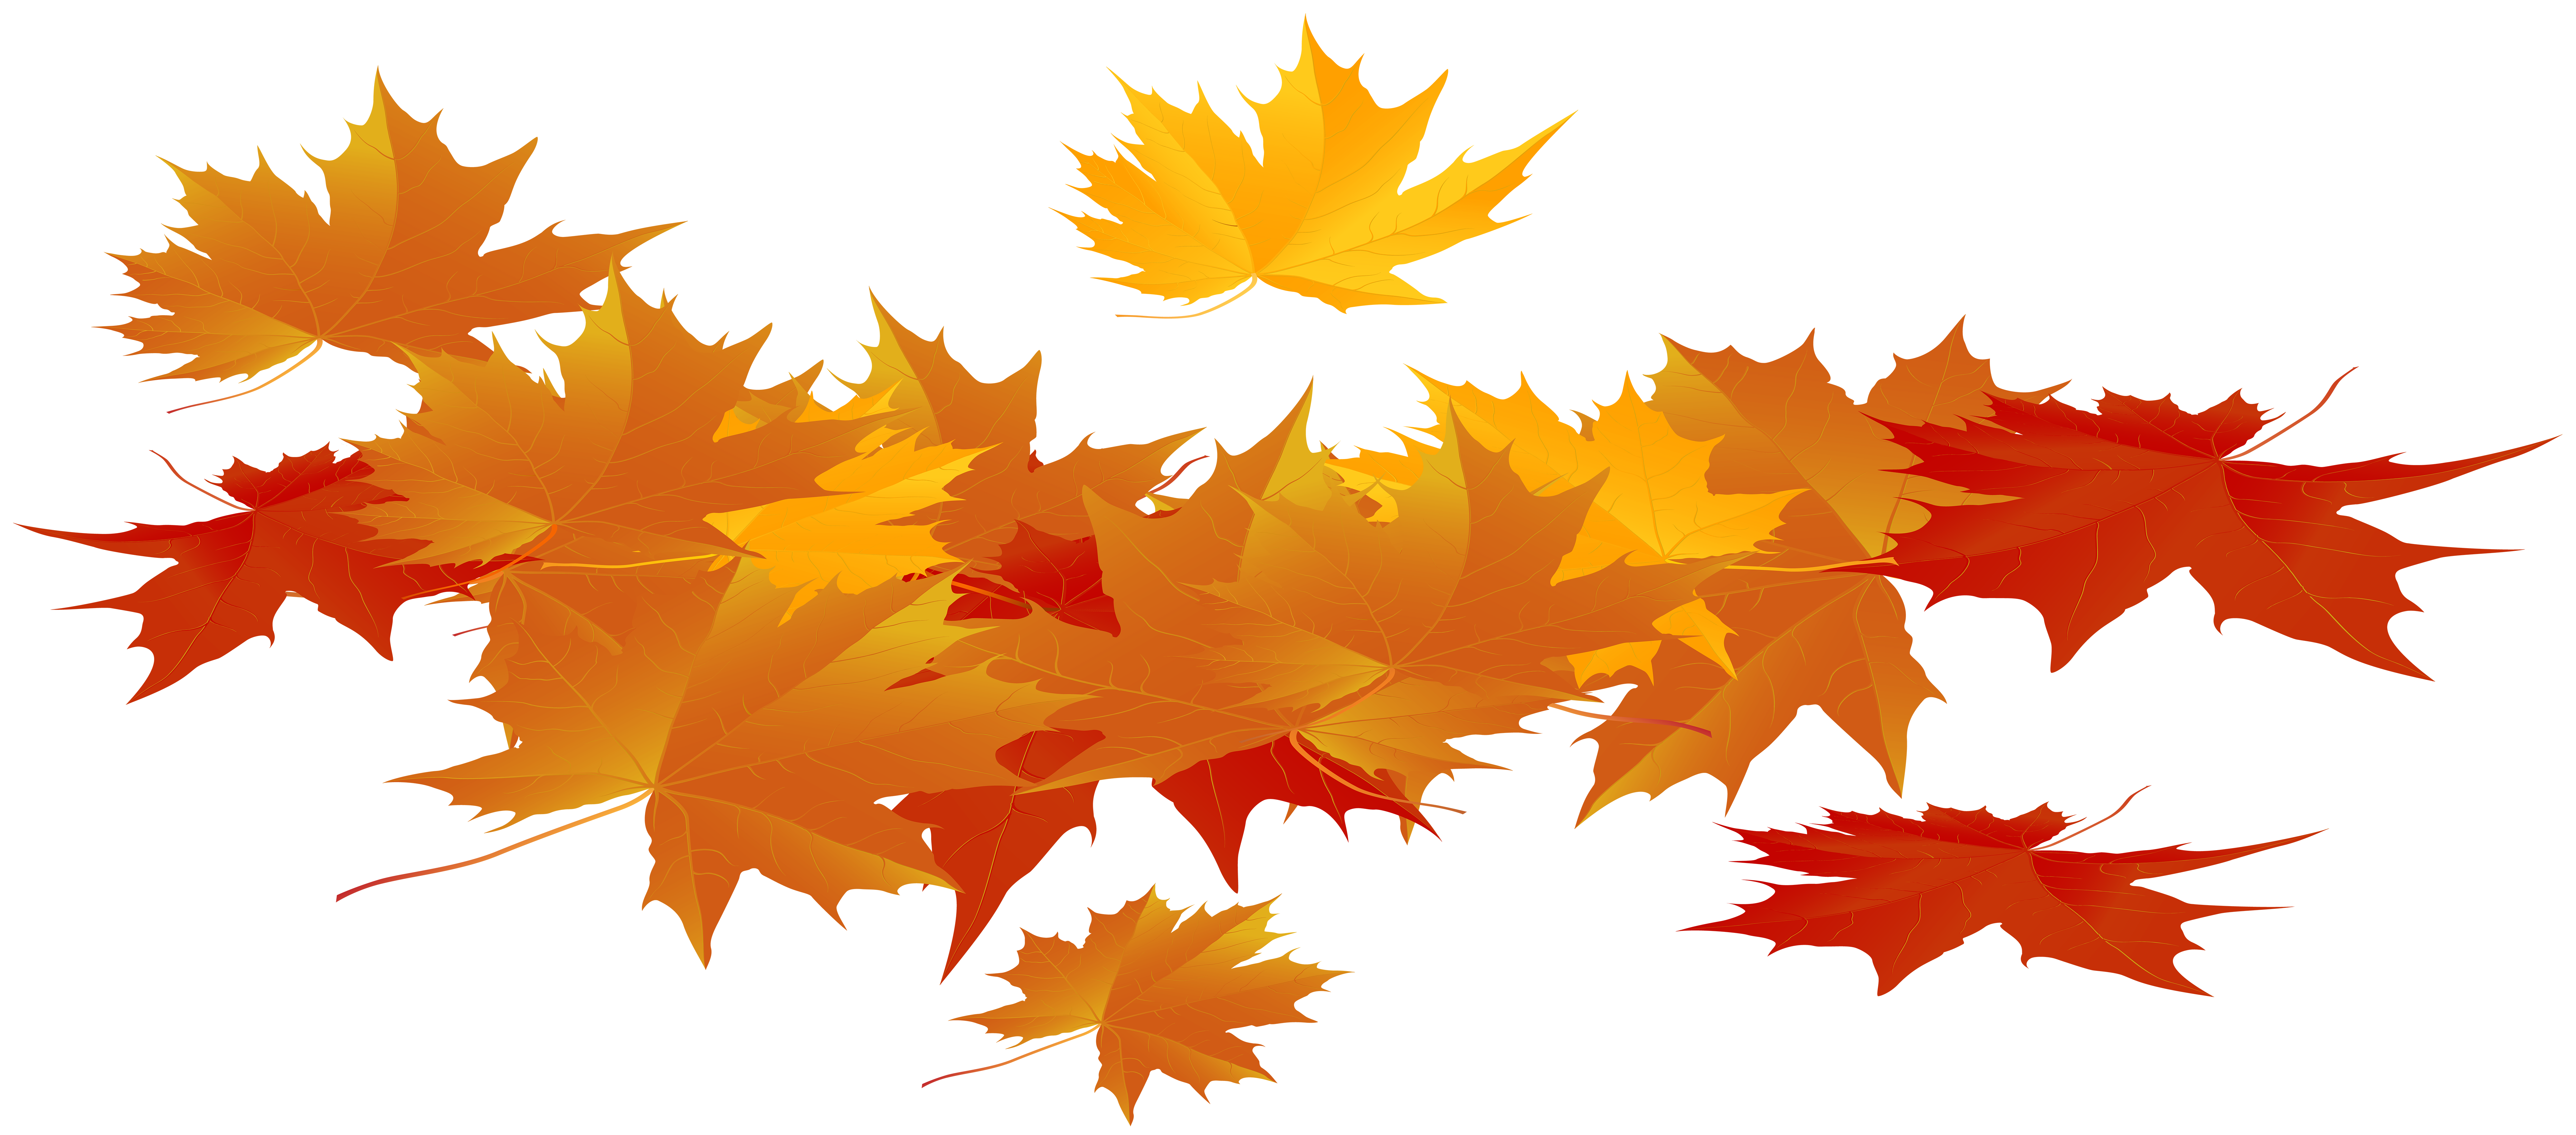 Autumn Leaves PNG Clip Art Image​ | Gallery Yopriceville - High-Quality  Free Images and Transparent PNG Clipart